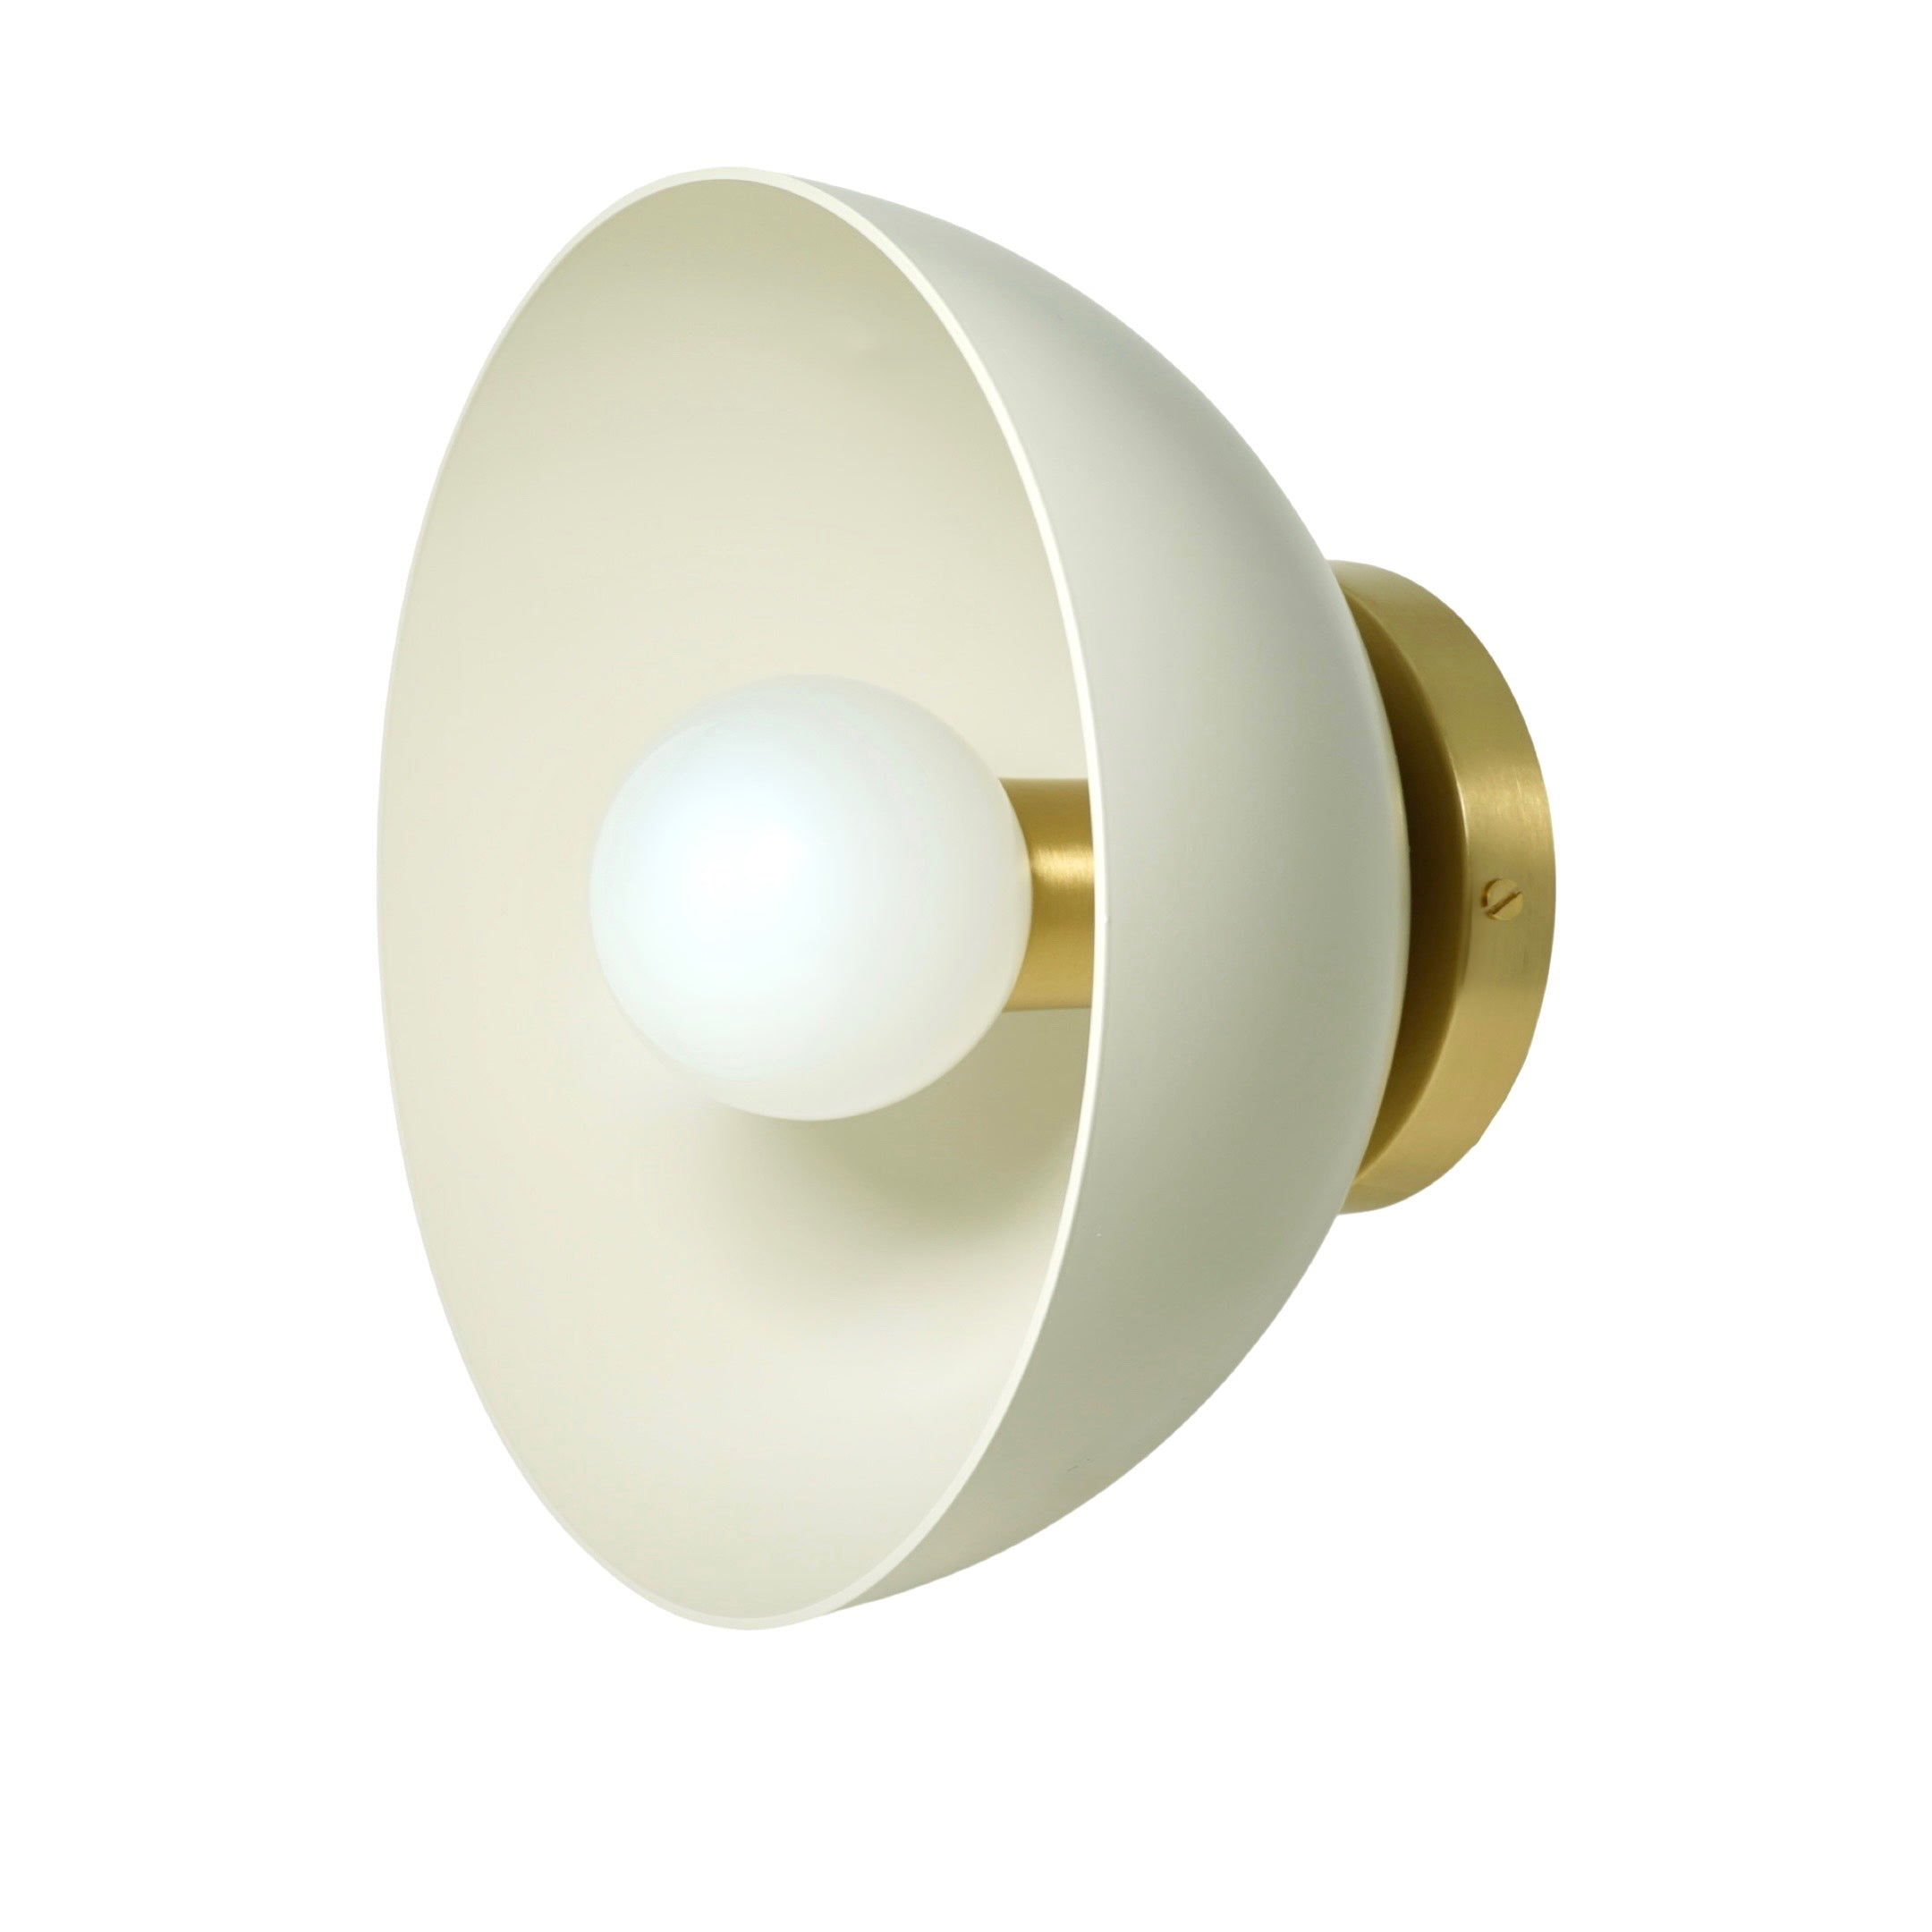 Brass and bone color hemi sconce 10-inch dutton brown lighting